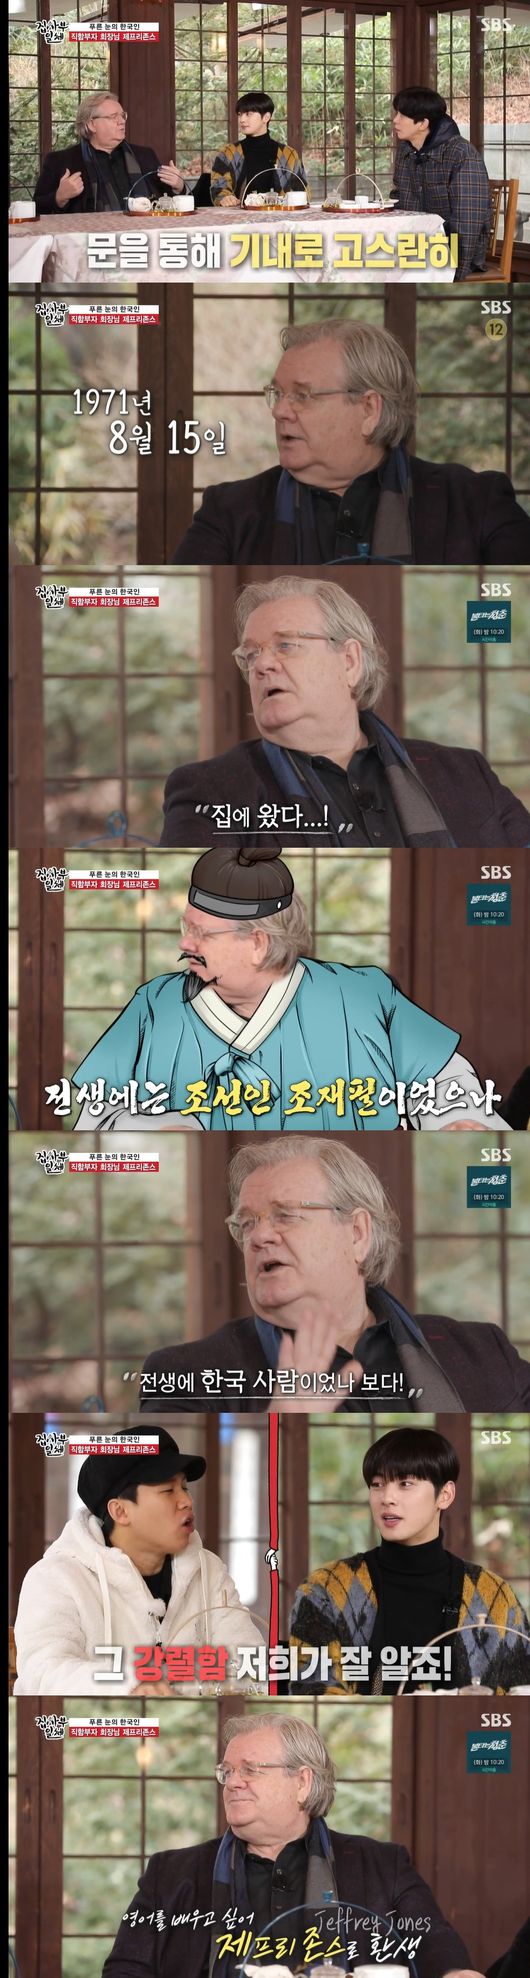 Jeffrey Quincy Jones, a blue-eyed Korean who opened the first house in Korea at All The Butlers, showed good influence and predicted Koreas GDP growth.In the SBS entertainment All The Butlers broadcast on the 17th, All The Butlers Roadway followed by Master Jeffrey Quincy Jones.Members gathered in front of the hanok to meet the new master on this day.The production team said, The master who is afraid of Korea is the master, he said. It is the master who is known as the largest law firm in Korea and the richest person in the title.All The Butlers foresaw the first legal master, and the second is the chairman of the nonprofit welfare organization foundation.The third time, he was the chairman of the United States of America Chamber of Commerce and Industry, and made the members more curious.The production team released the masters name, and the master Cho Jae-pil appeared on a motorcycle. He introduced himself as Korea name Cho Jae-pil, original name Jeffrey Quincy Jones.He then decided to listen to the story of the title-rich chairman, Jeffrey Quincy Jones, who moved indoors and asked why he stepped on the ground in Korea in 1971.I visited for volunteer activities as a college student, when I arrived at Gimpo Airport on August 15, 1971, when I had only a field around me, he said. I felt that the smell of manure was home, but it was my first time, but I felt familiar and warm. I felt like I was a Korean person in my past life.When asked about what happened to Korea law firm Lawyer, he said, After the Korean War, the problem of separated families was severe in 70 years.Thats what Memory did yesterday, and after two years of service, I went back to United States of America, and I thought Id come back, I felt like I wanted to be a psychiatrist and treat the pain of war, the trauma, he said.I did not get it because I was in school, and the surgery was not disgusting, he said modestly, saying, I was Lawyer because I did not have anything to do.At the 2012 London Olympics, Park Jong-woo was a bronze medalist in the Dokdo is our land ceremony, he won a medal in the role of Lawyer, and was very happy at that time, he said.He said, We set up a goal to help Korea India, and we met with the late President Kim Dae-jung almost once a month to discuss various things such as India activation.Jeffrey Quincy Jones, 51, of Korea, introduced House, saying, Lets go home: House for sick childrens families.He said, The nonprofit foundation for children, building a house for sick children, and making a home for the family of a child who can not leave the hospital because the family is separated during treatment. He said, It is a house that helps children to recover quickly.He introduced South Korea No.1 House, saying, It is to protect the family.He said he opened a free shelter to restore the energy needed for nursing, and said he also opened a library so that children who can not go to school can continue their studies.I hope that the children who spend hard time will be comfortable for a while, and I want to be with my family.Jeffrey said, I will not read it, and released a poem written by sick children.It was a letter that was afraid but made up of promise and courage to not give up.Jeffrey said, These children have to help us, this is the best thing I do. What is more valuable than anything in the world is to support childrens hopes and future.We will all have a bright future, he said, moving everyone in the future as they are actually leading the way.I want to be useful: I want to be useful, he said. It is the purpose and goal of my life. I think I will be happy if people remember that I was very useful after I died.There are a lot of Danger in Korea, and there are many developments because there are constantly there, said Europe, who grew dramatically every time he passed the crisis against Danger.In 2050, the world GDP United States of America was announced to be Korea, and the second place will be Korea. It will be unprecedented to develop into Europe given by Europe, which receives the national aid in 70 years, and the fearful and proud South Korea will be bright.All The Butlers broadcast screen capture